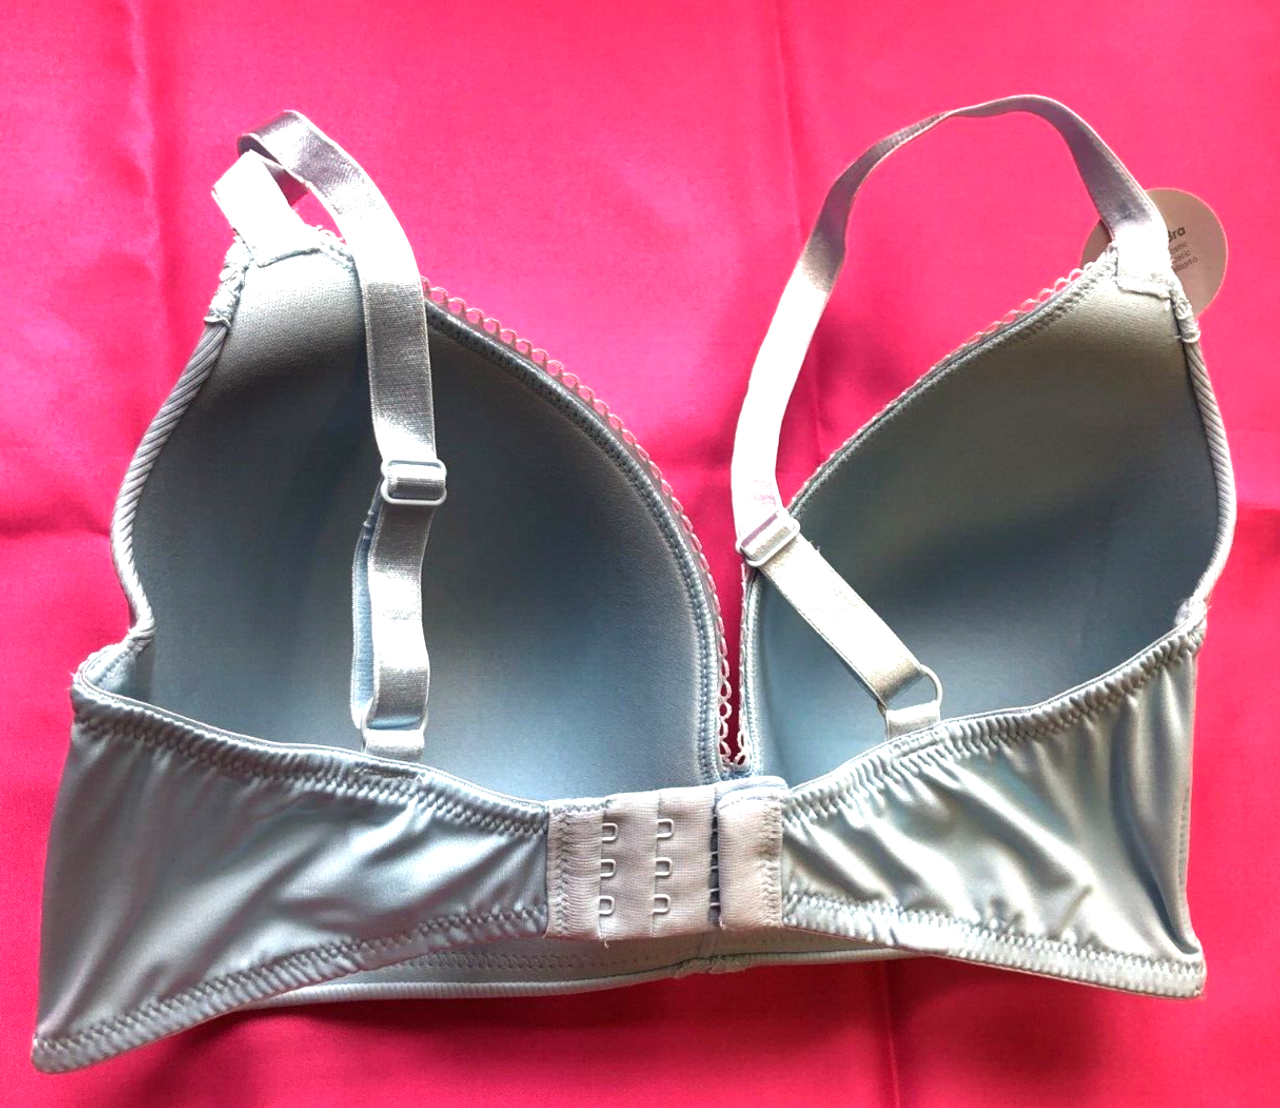 Bra 34DD Light Blue Non-Wired Moulded Plunge by F&F New + Tags